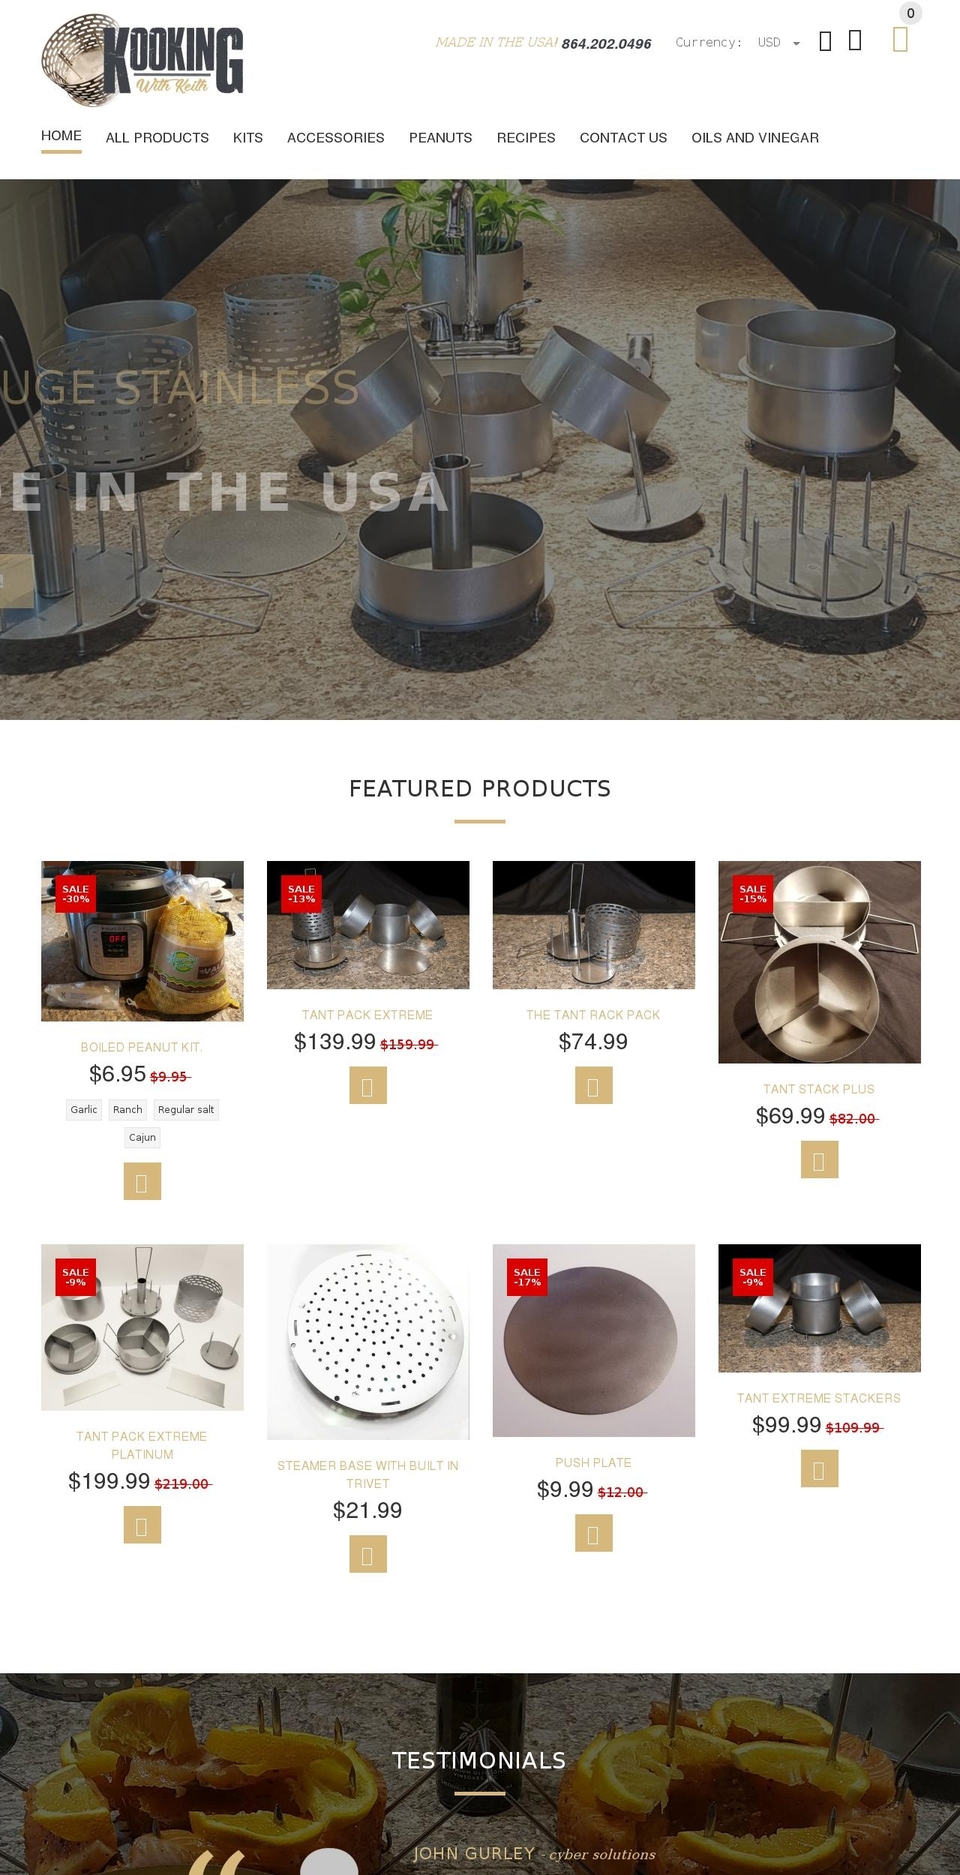 install-me-yourstore-v2-1-7 Shopify theme site example kookingwithkeith.com